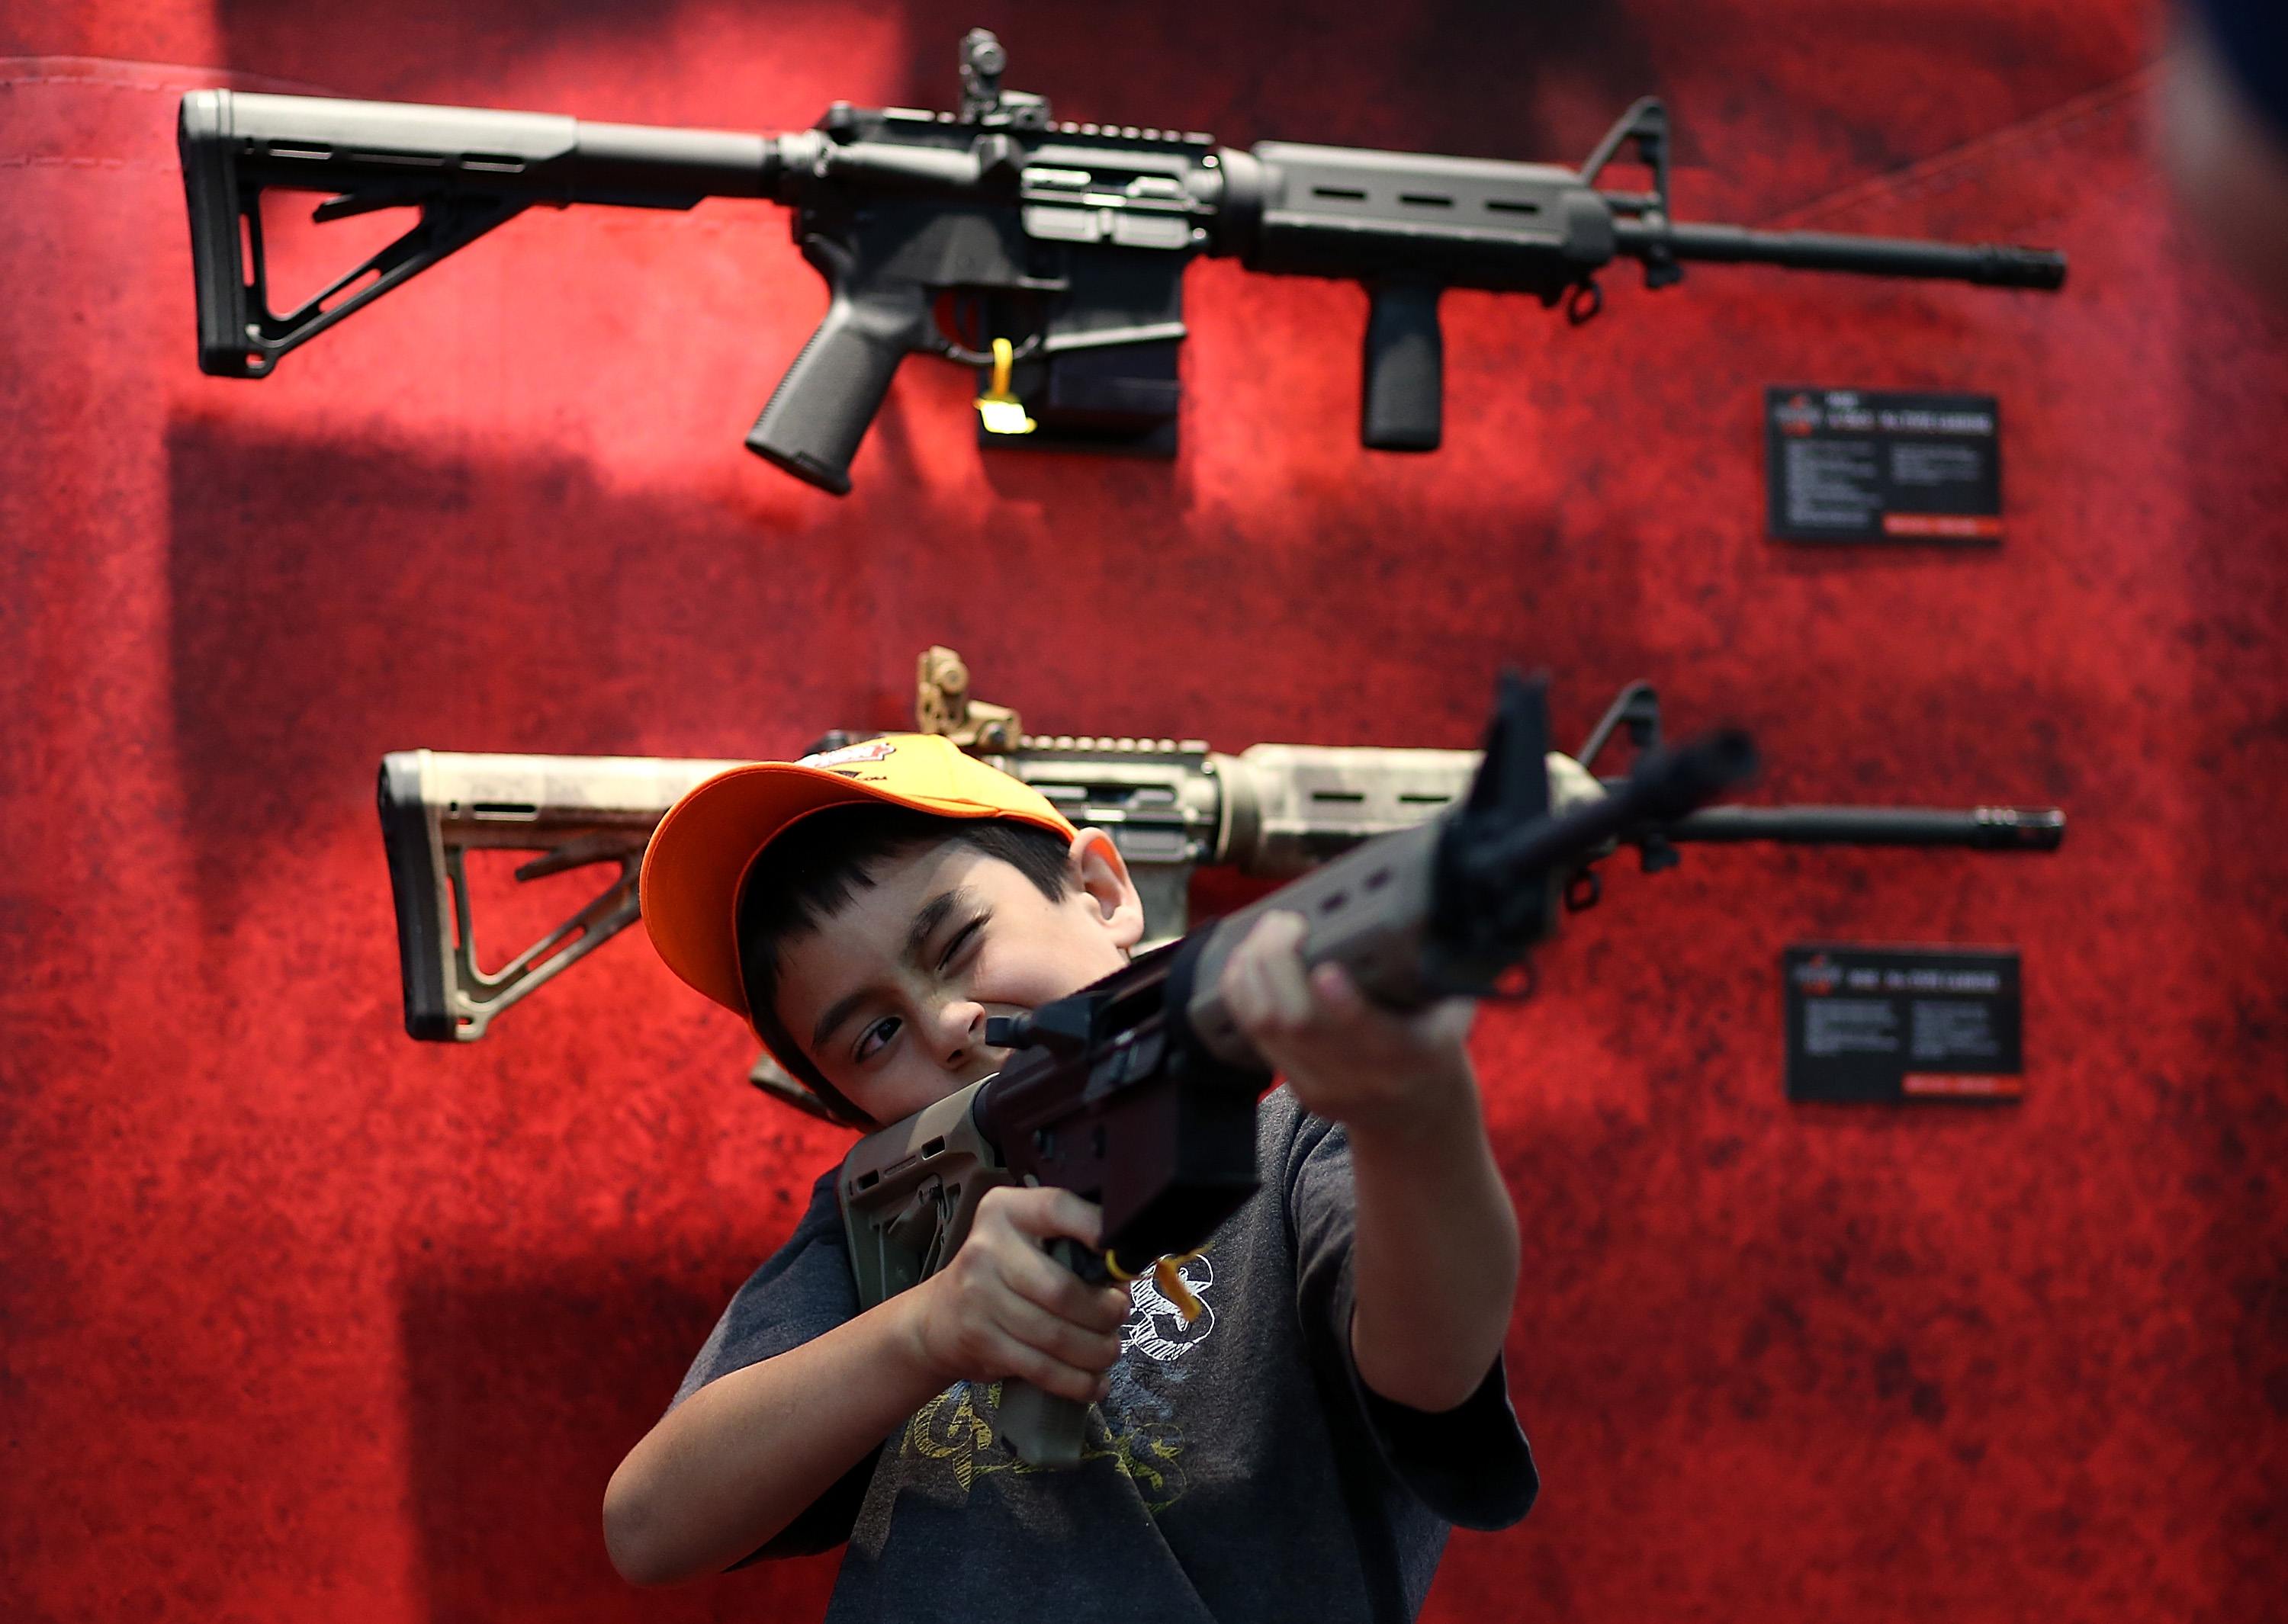 a child tries out an assault rifle against a red display with guns